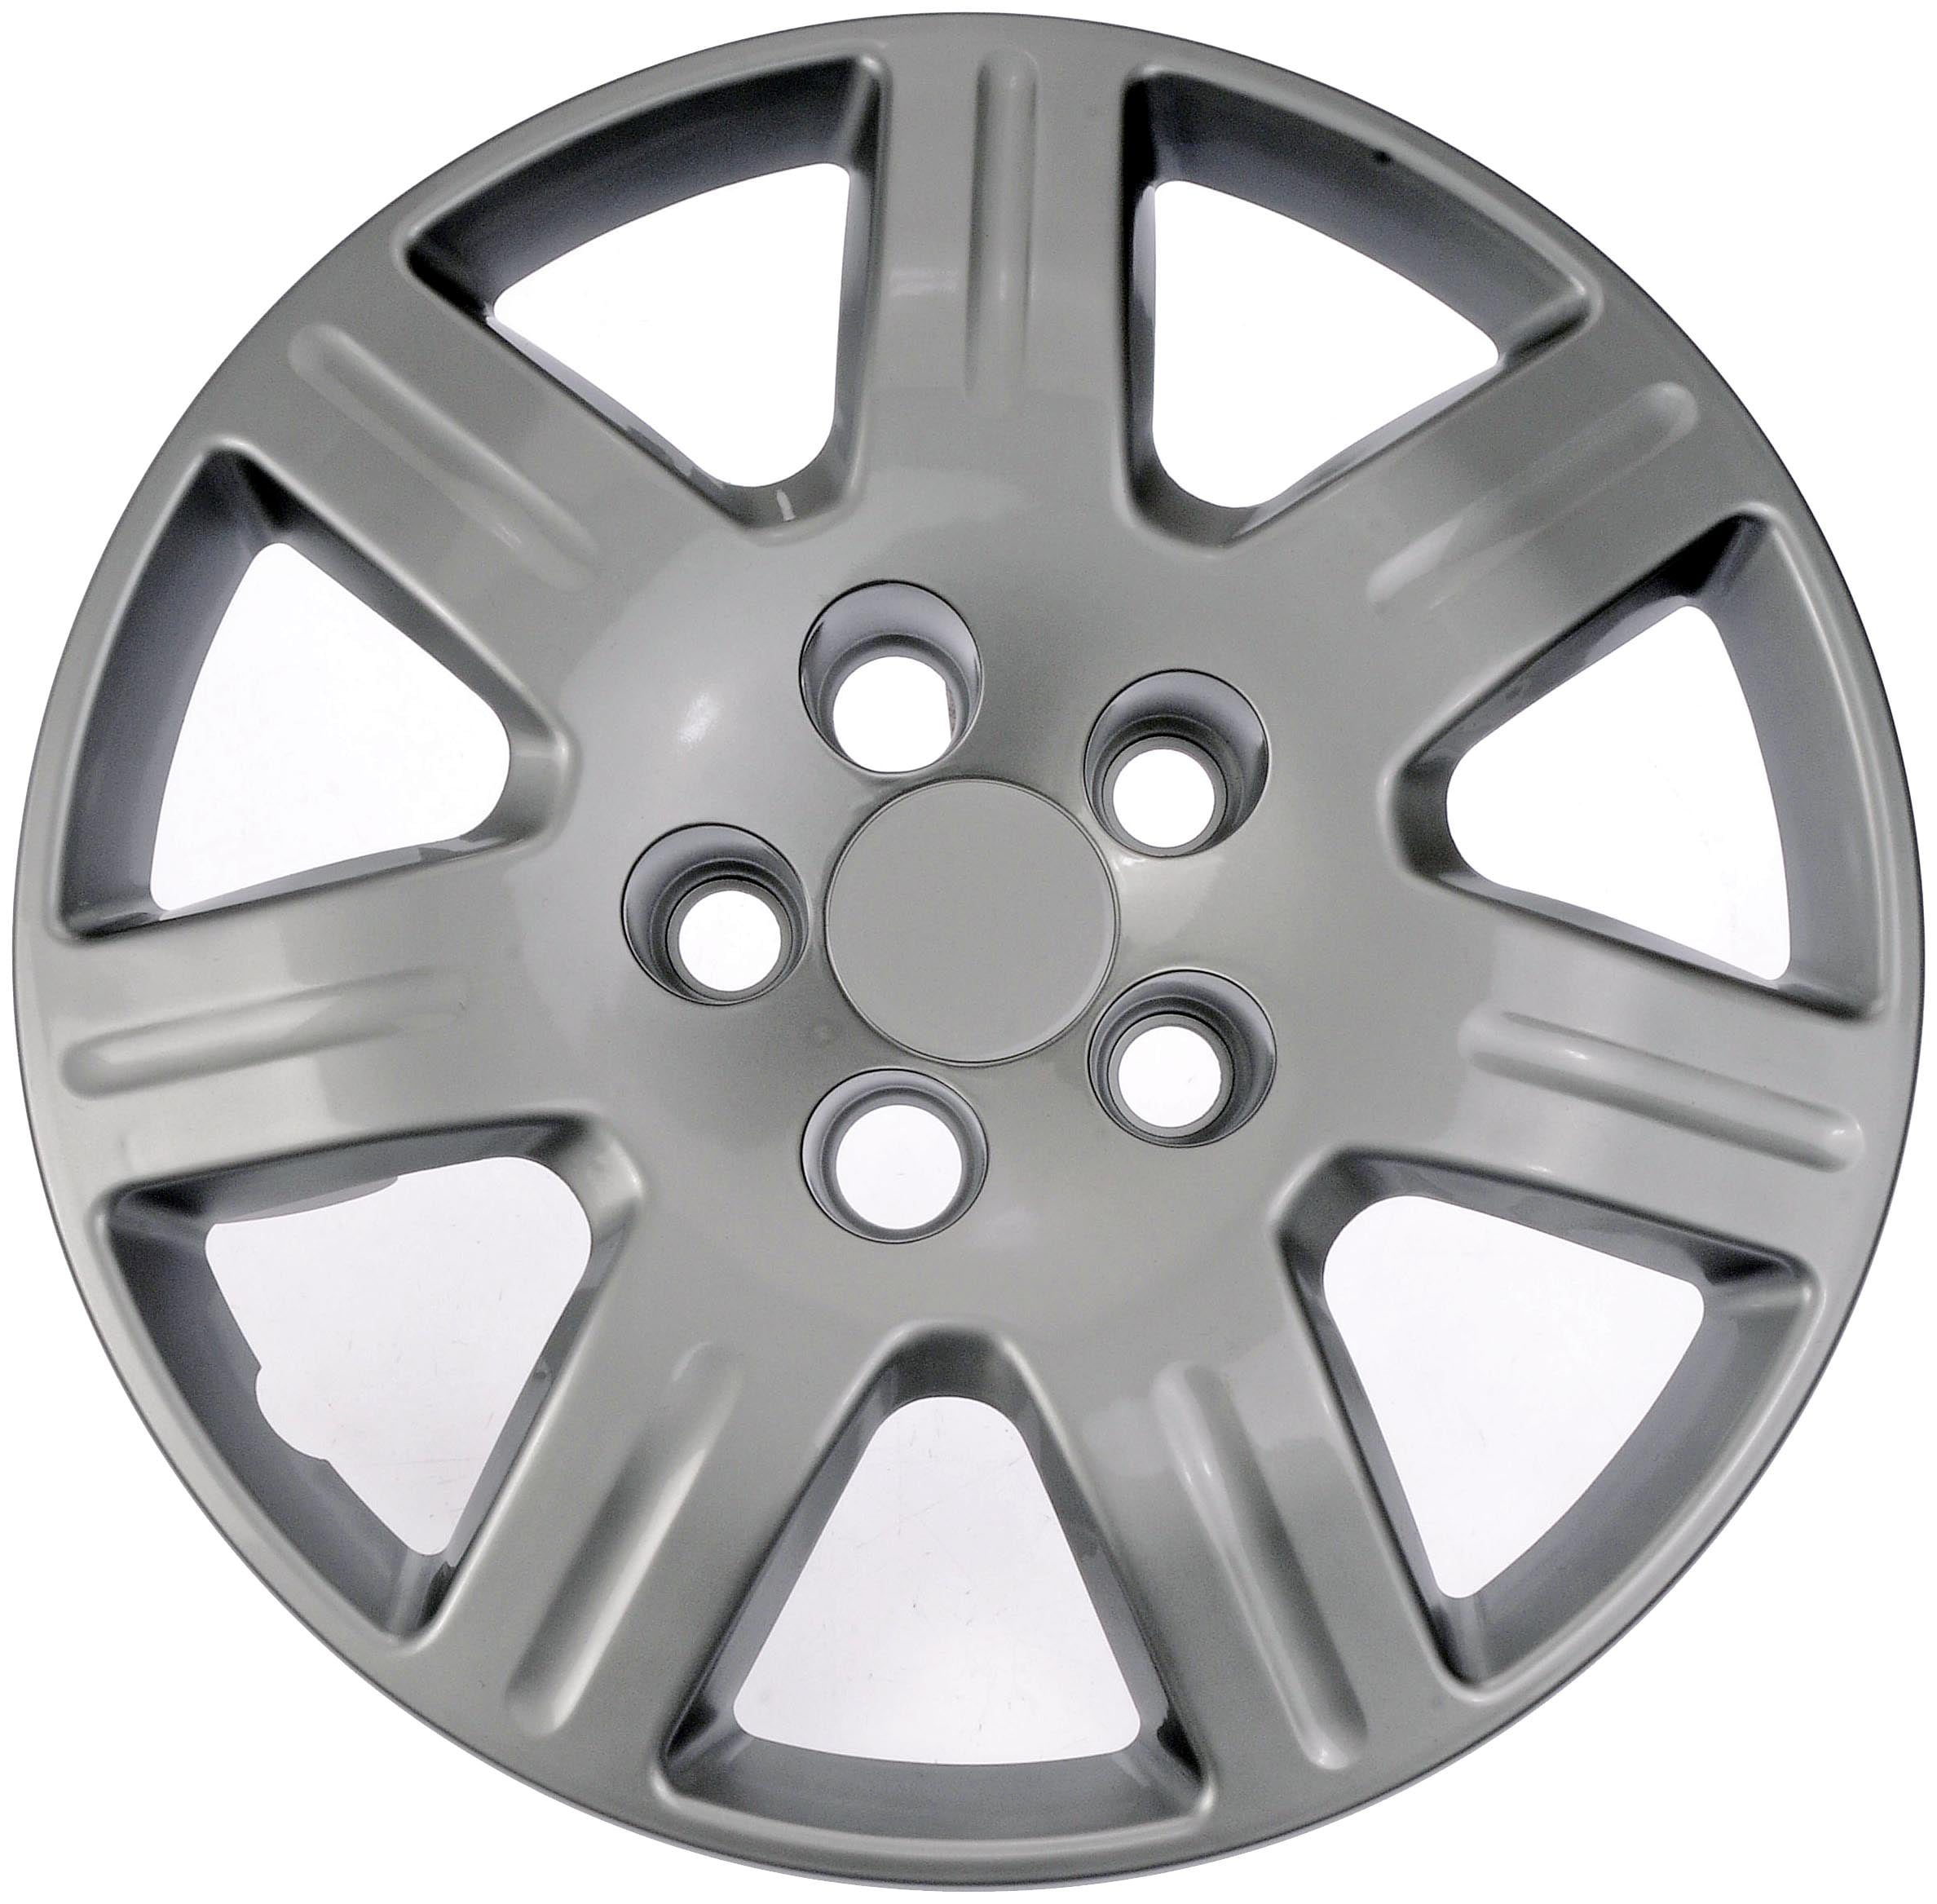 Details about    16" Set of 4 Wheel Covers Full Rim Snap On Hub Caps fit R16 Tire & Steel Wheels 